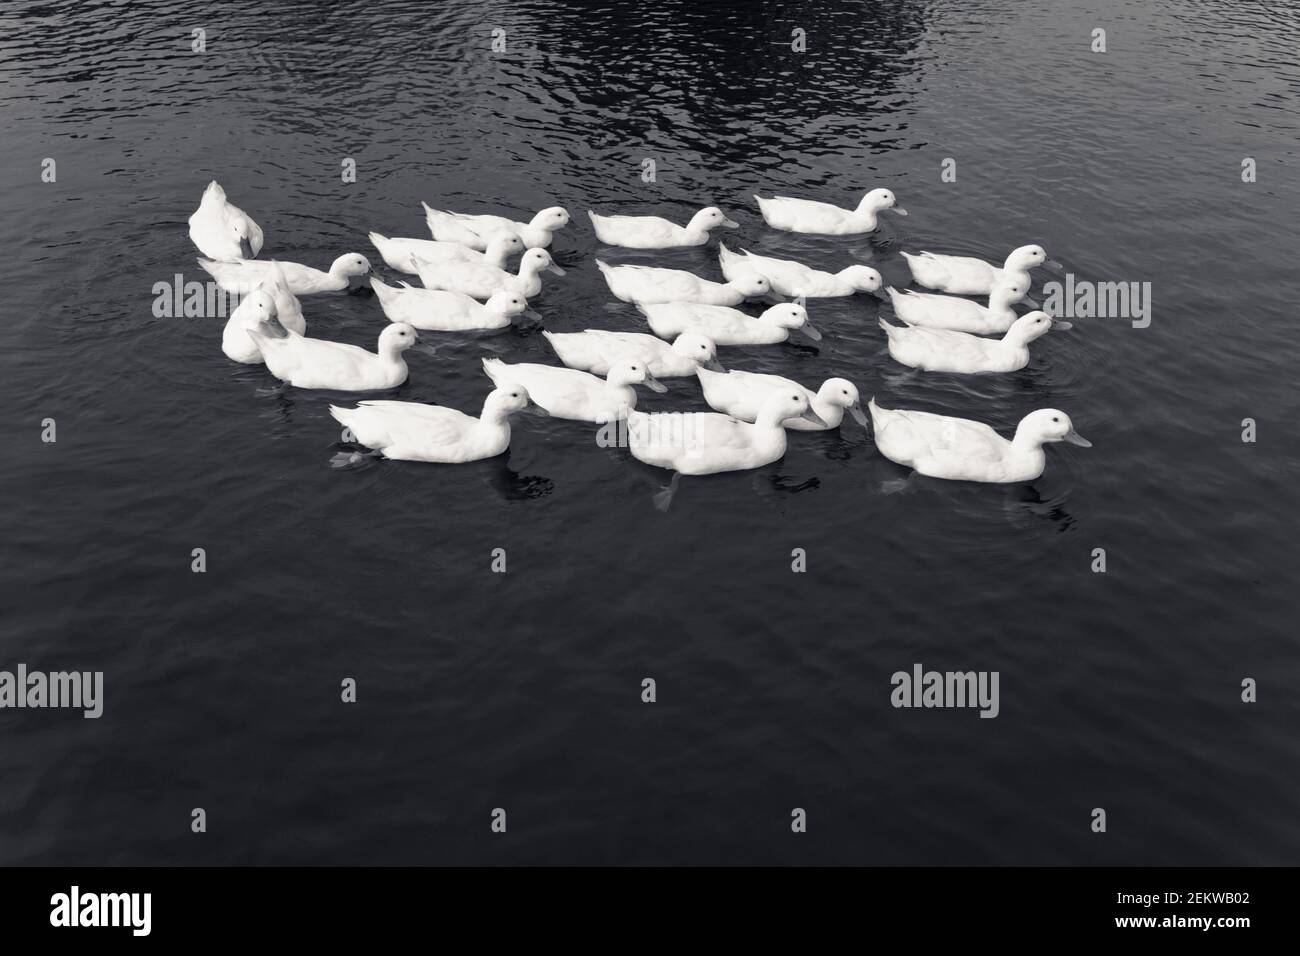 a group, raft, team, paddling, of white ducks, pond, swimming, following, have you got some bread? Stock Photo